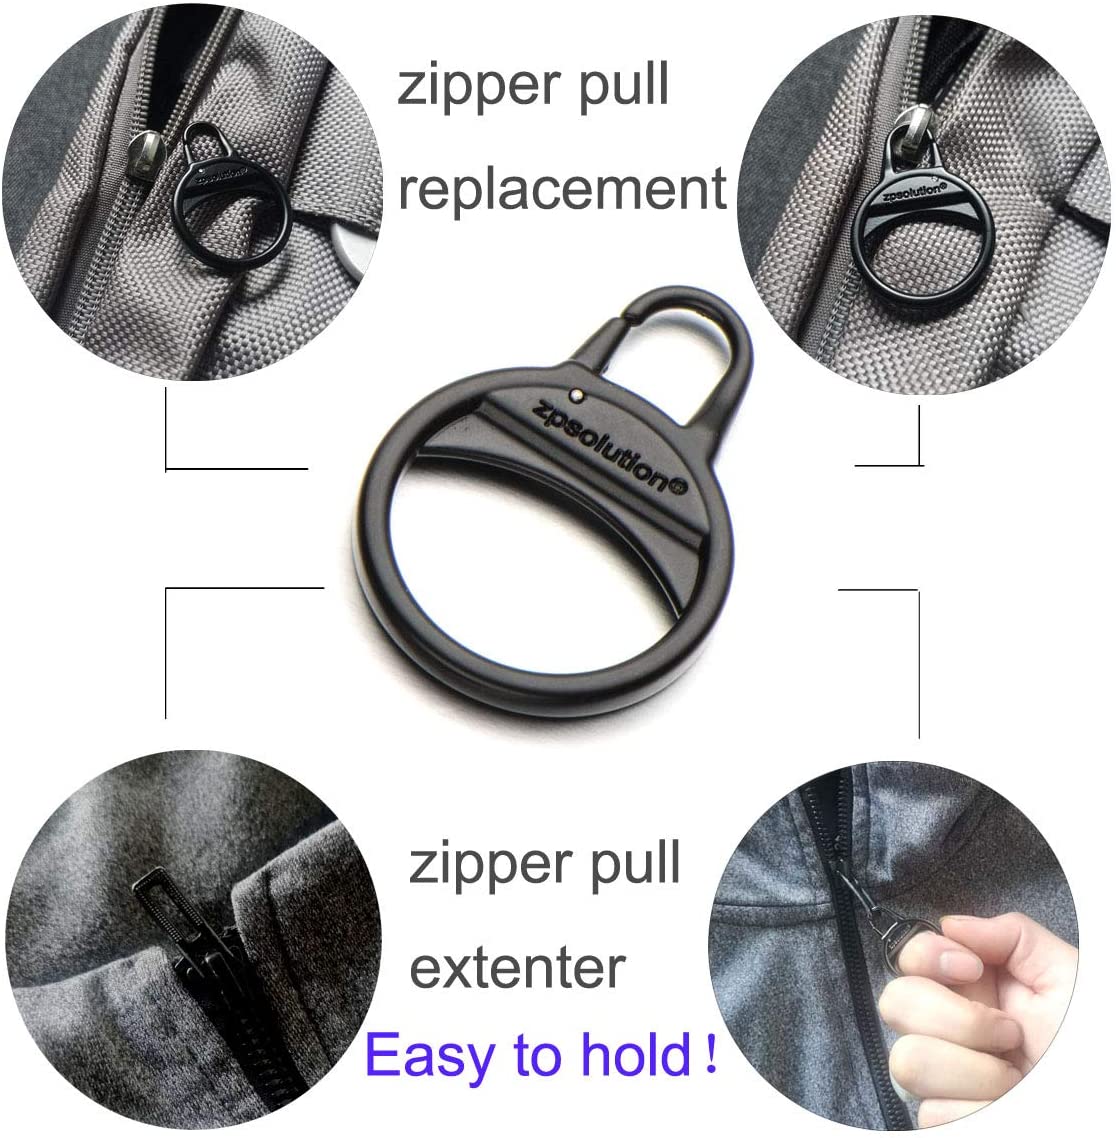 Zipper Pull Replacement for Who with Arthritis or Limited Hand Dexterity